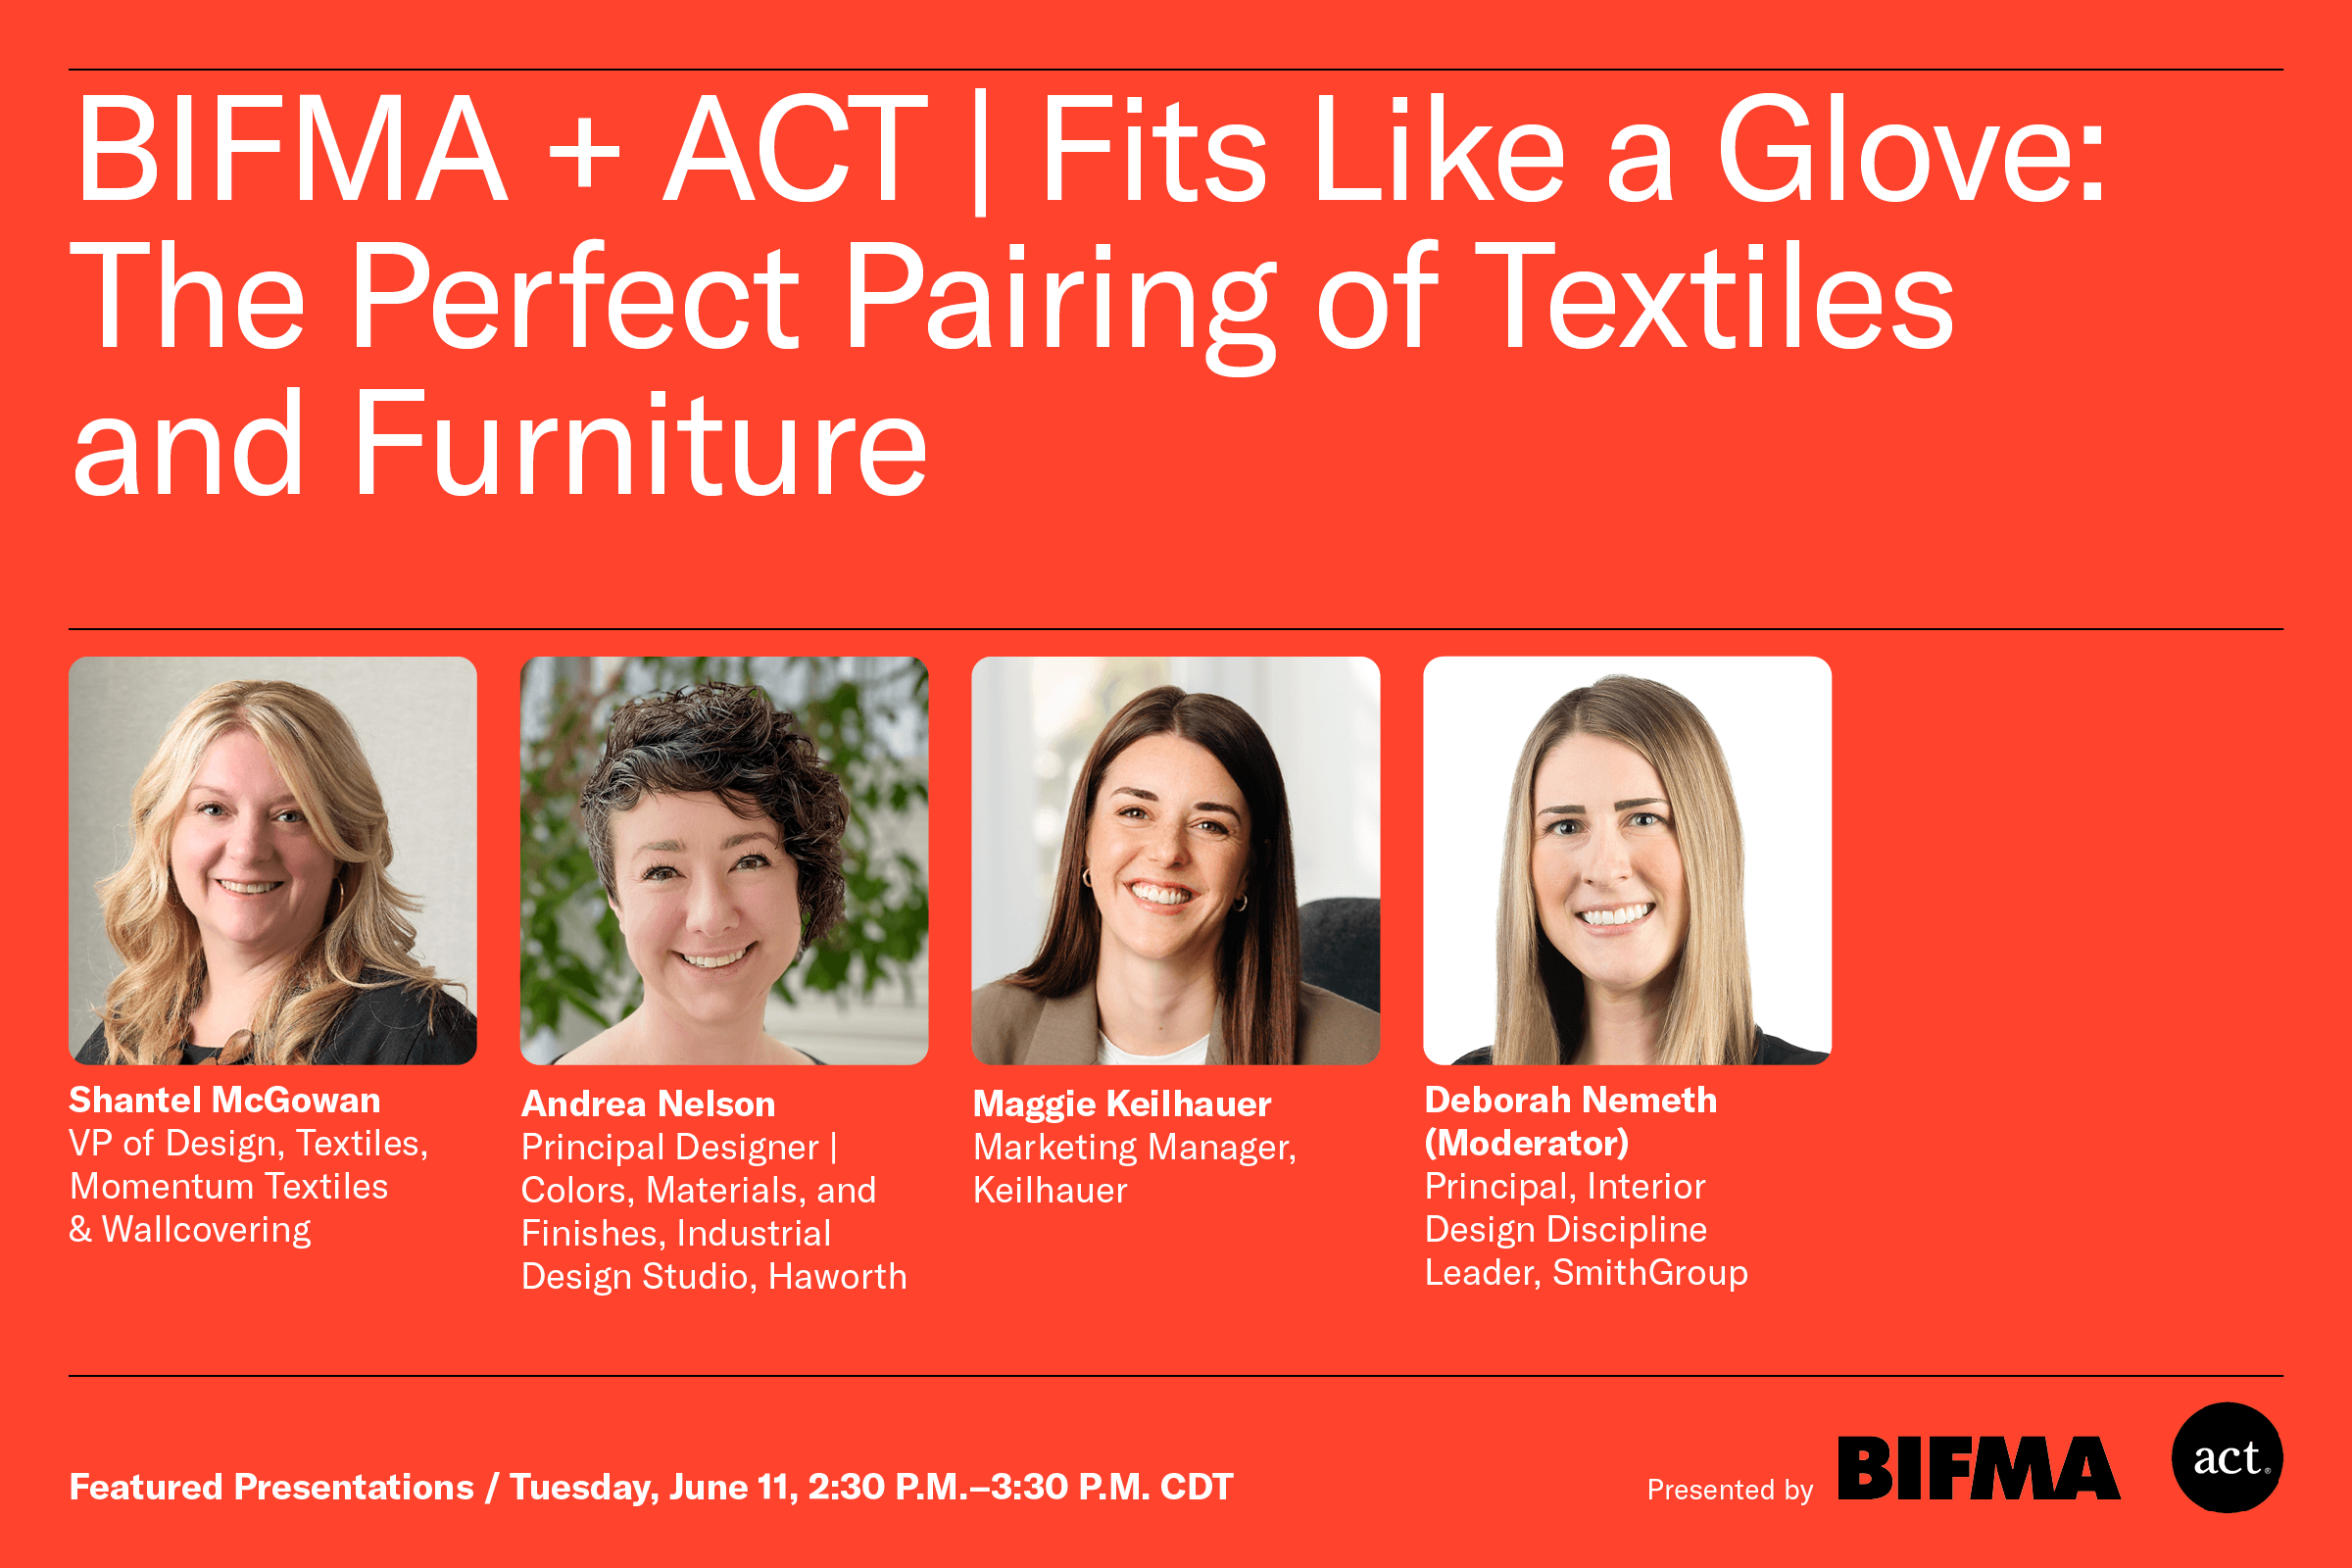 BIFMA + ACT | Fits Like a Glove: The Perfect Pairing of Textiles and Furniture - Shantel McGowan, VP of Design, Textiles, Momentum Textiles & Wallcovering - Andrea Nelson, Principal Designer | Colors, Materials, and Finishes, Industrial Design Studio, Haworth - Maggie Keilhauer, Marketing Manager, Keilhauer - Deborah Nemeth (Moderator), Principal, Interior Design Discipline Leader, SmithGroup - Featured Presentations / Tuesday, June 11, 2:30 p.m. - 3:30 p.m. CDT - Presented by BIFMA, ACT